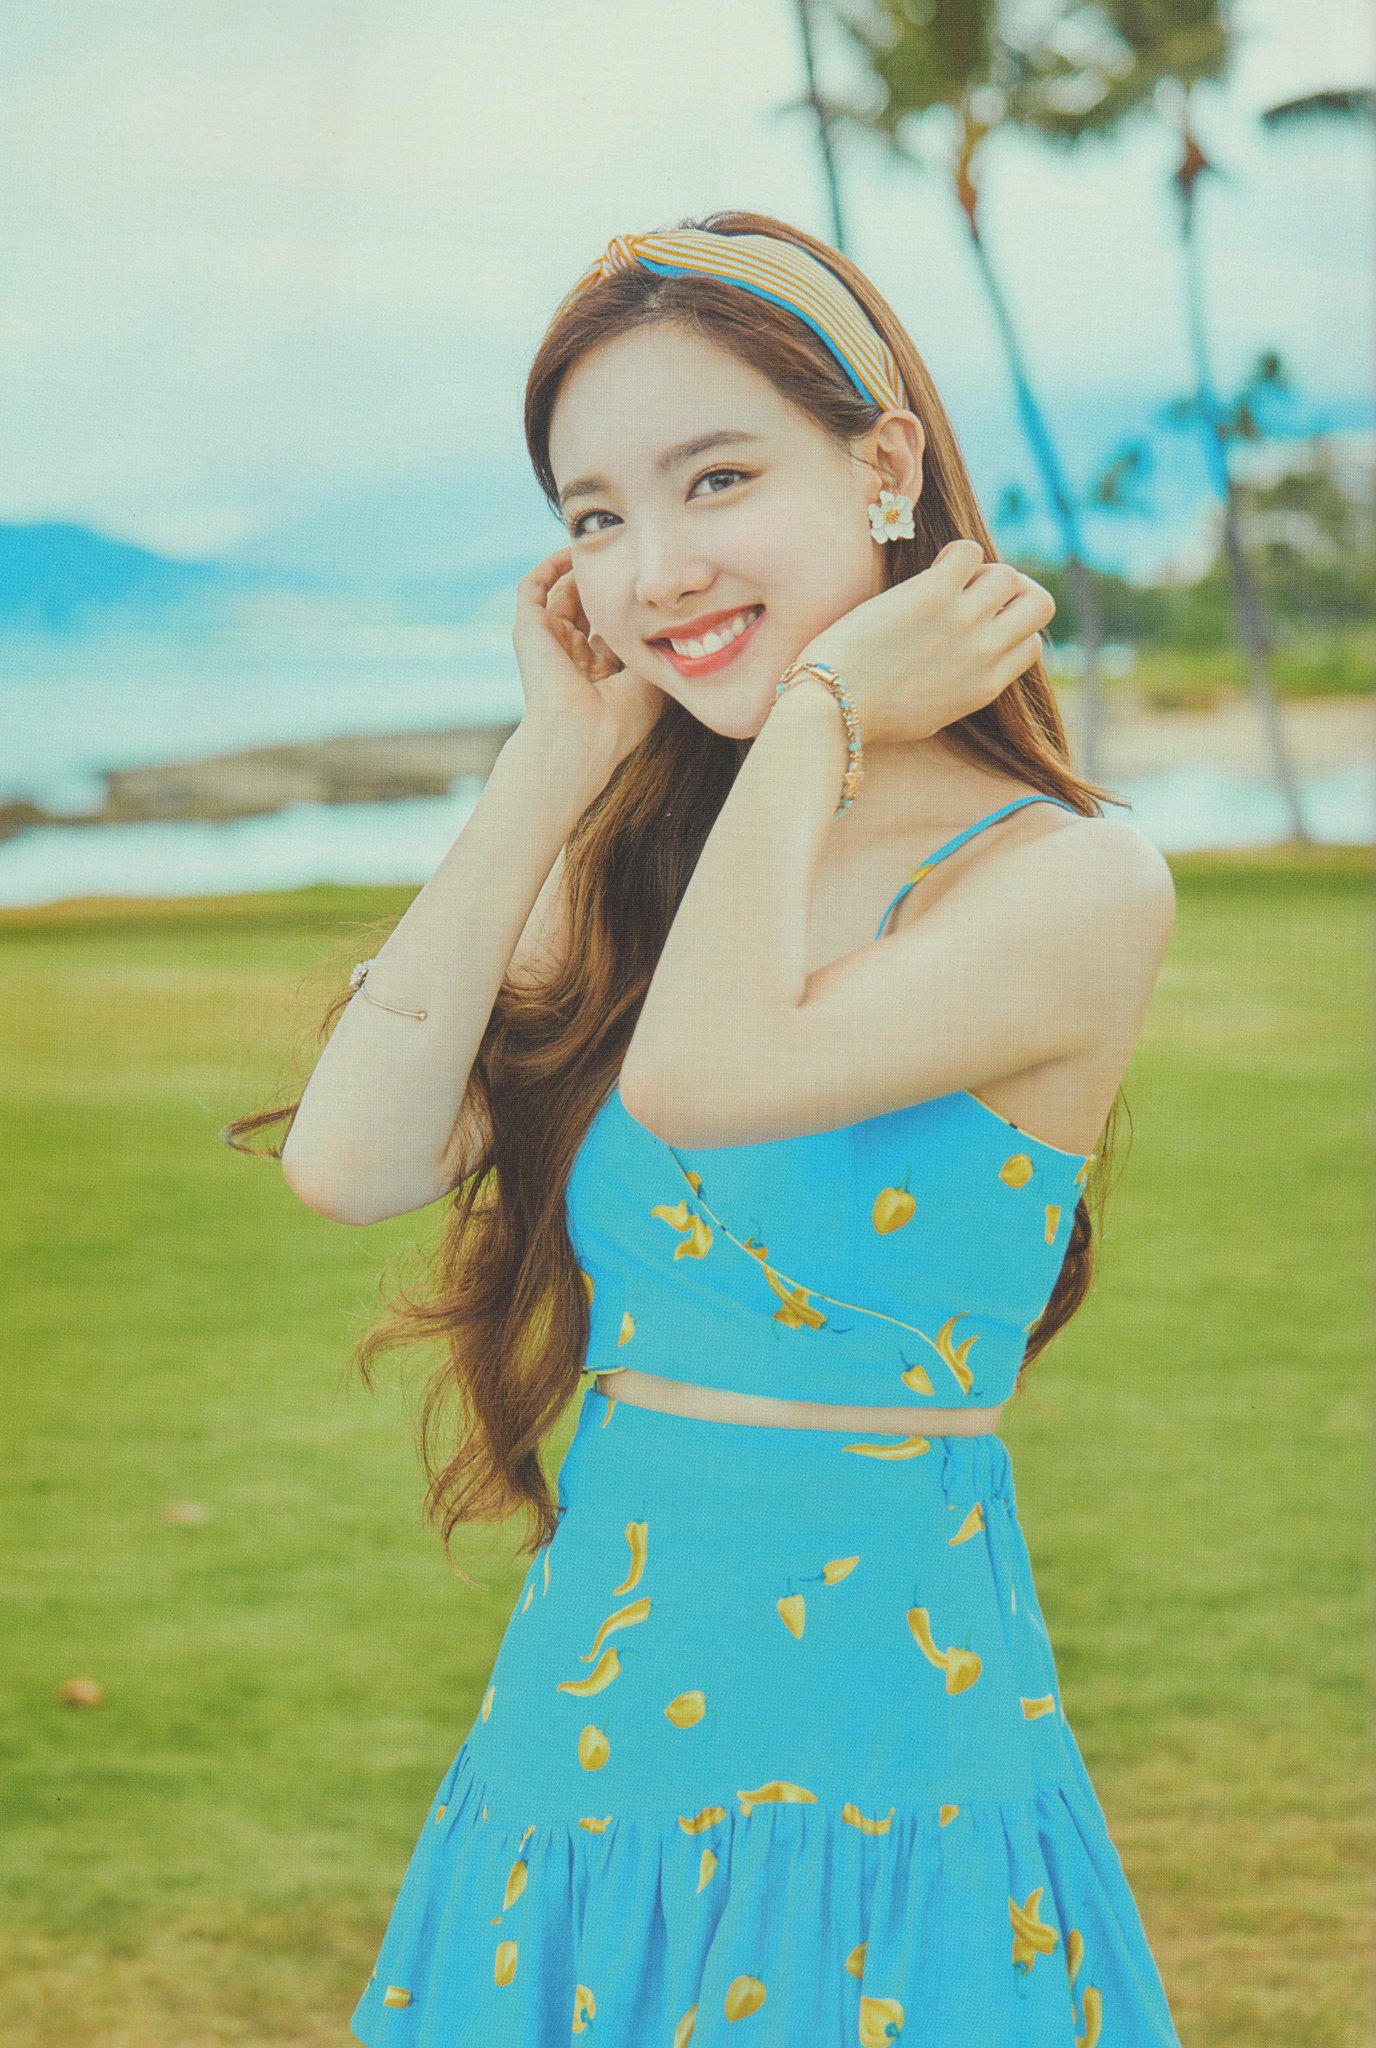 Nayeon Twice Wallpapers